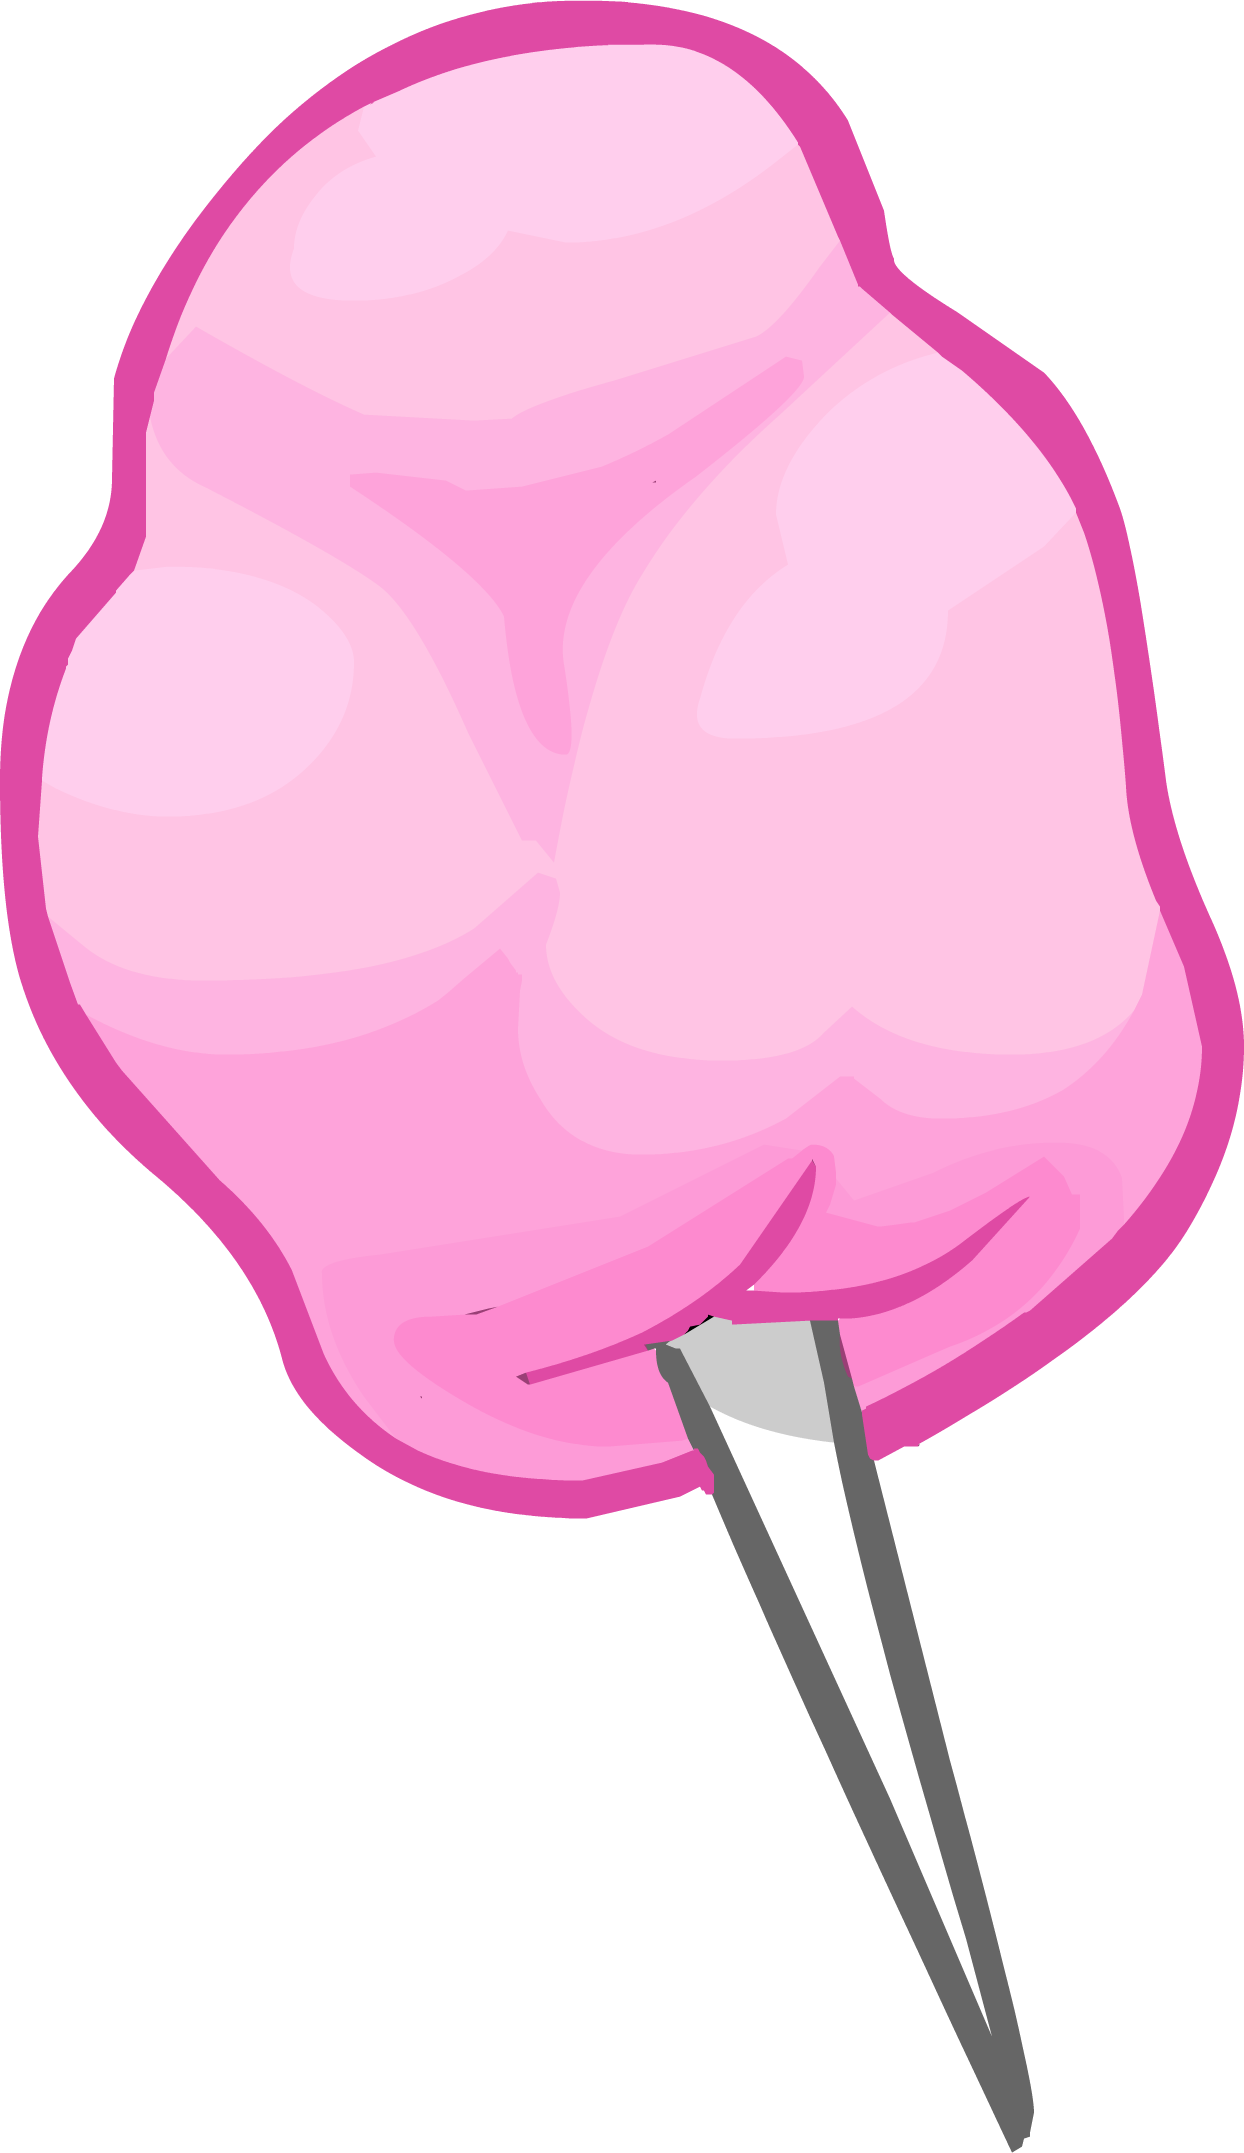 Cotton candy clipart 2